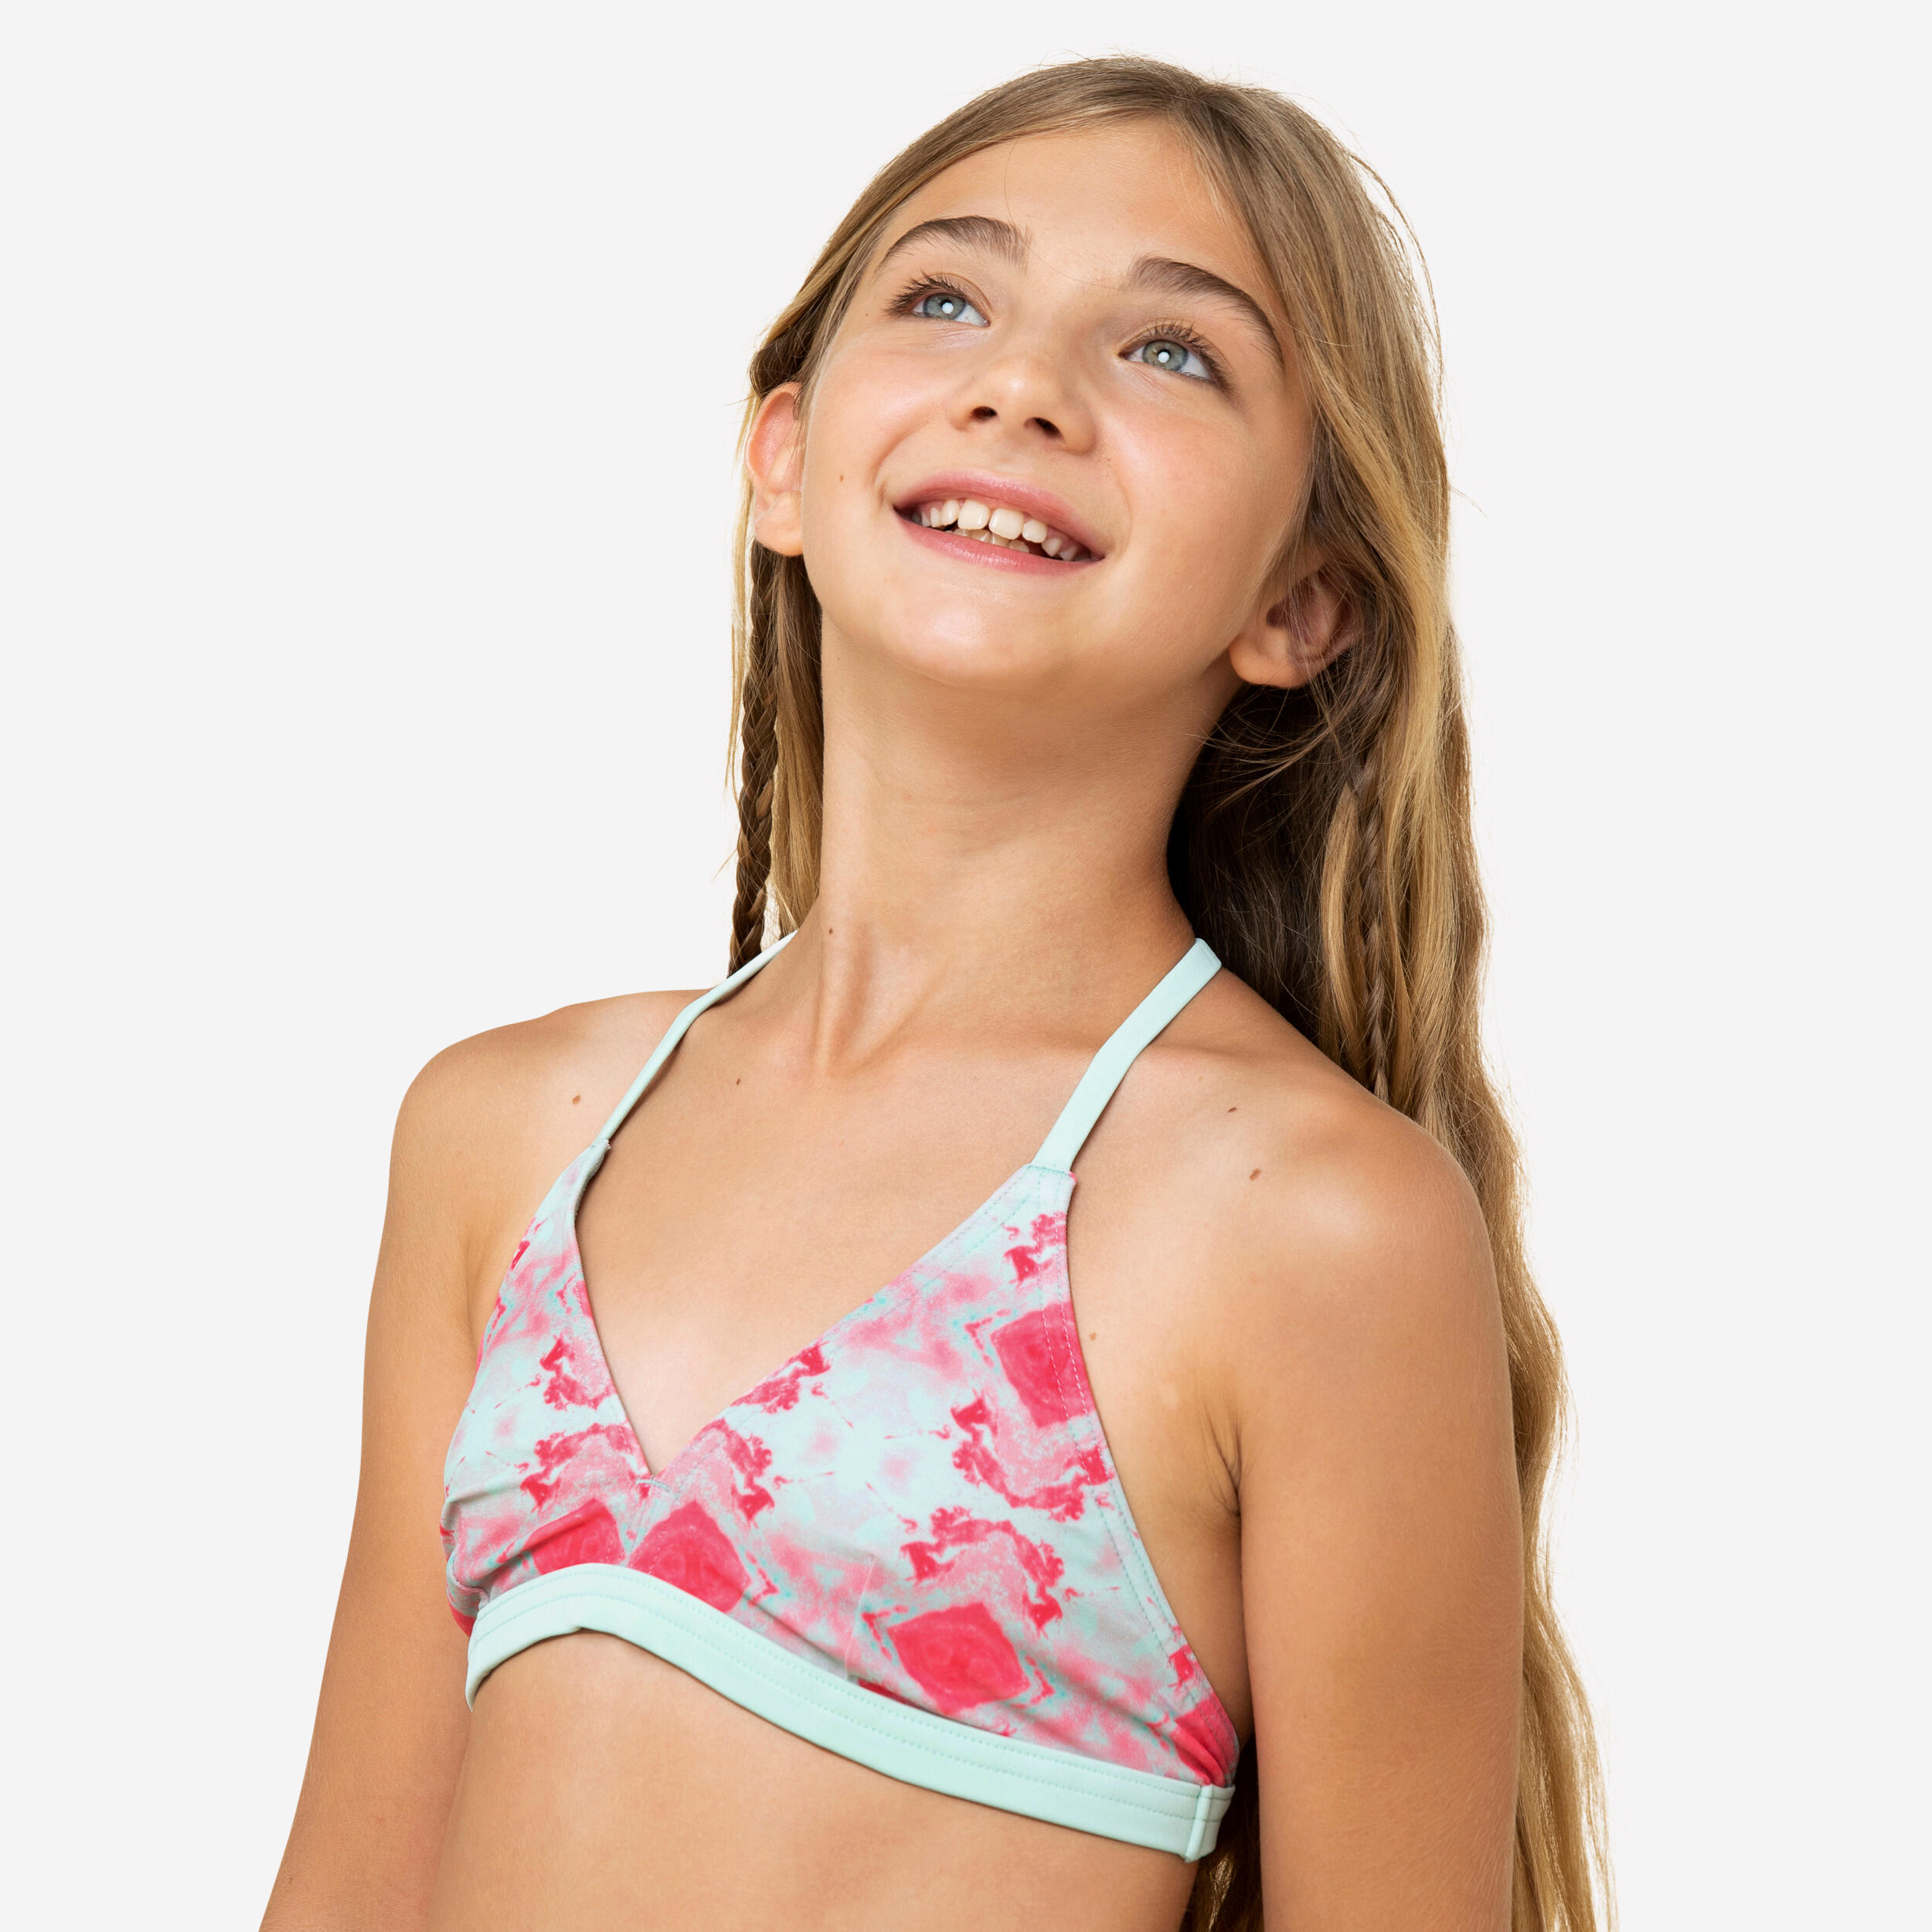 GIRL'S SWIMSUIT TOP SURF TRIANGLE BETTY 500 TURQUOISE PINK OLAIAN